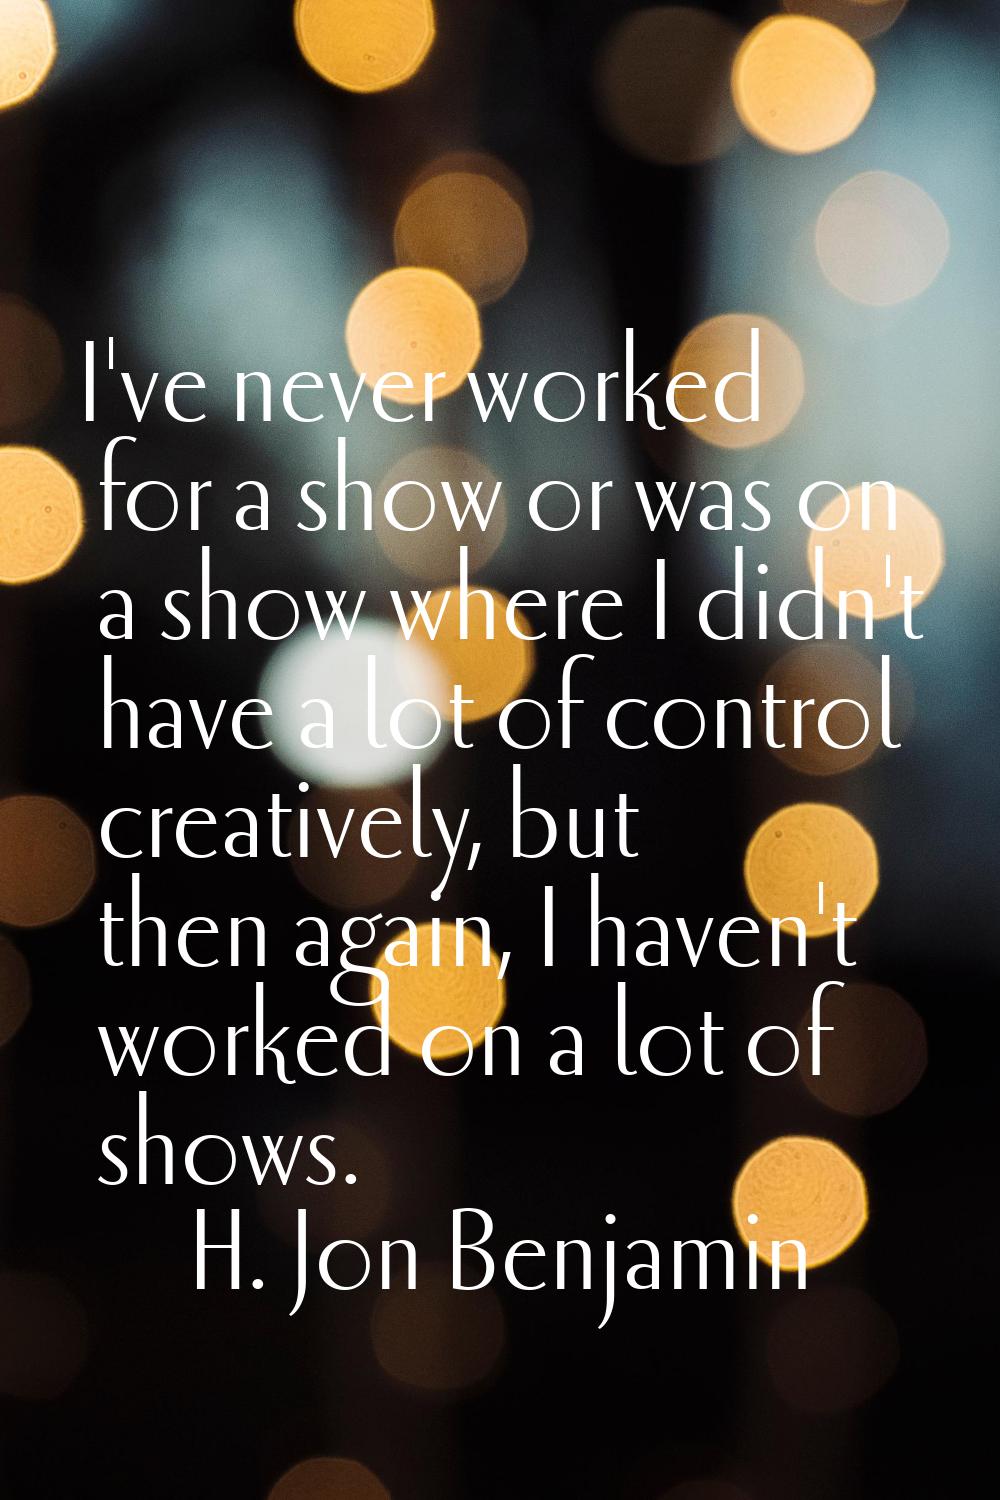 I've never worked for a show or was on a show where I didn't have a lot of control creatively, but 